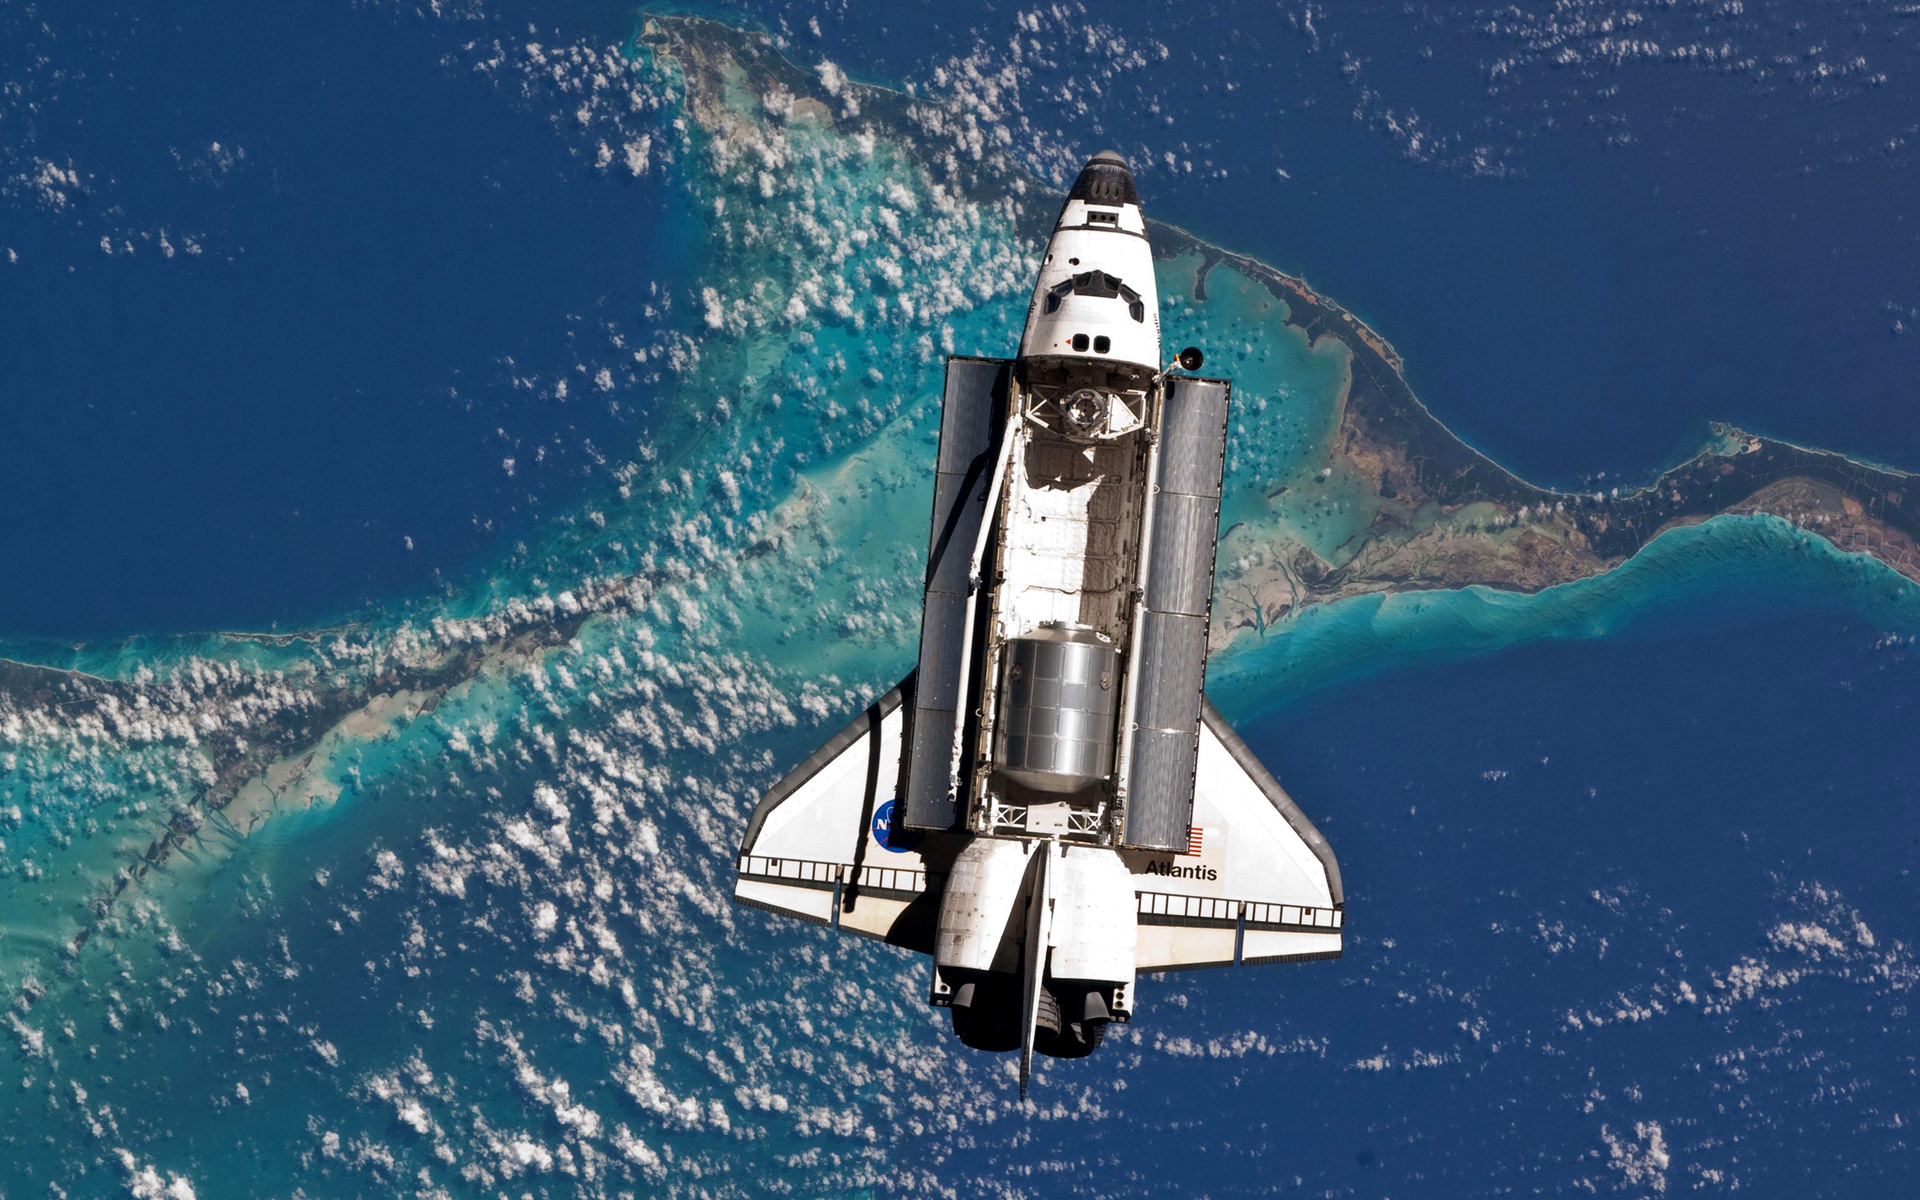 space shuttle atlantis, vehicles, from space, nasa, space shuttle, space, space shuttles